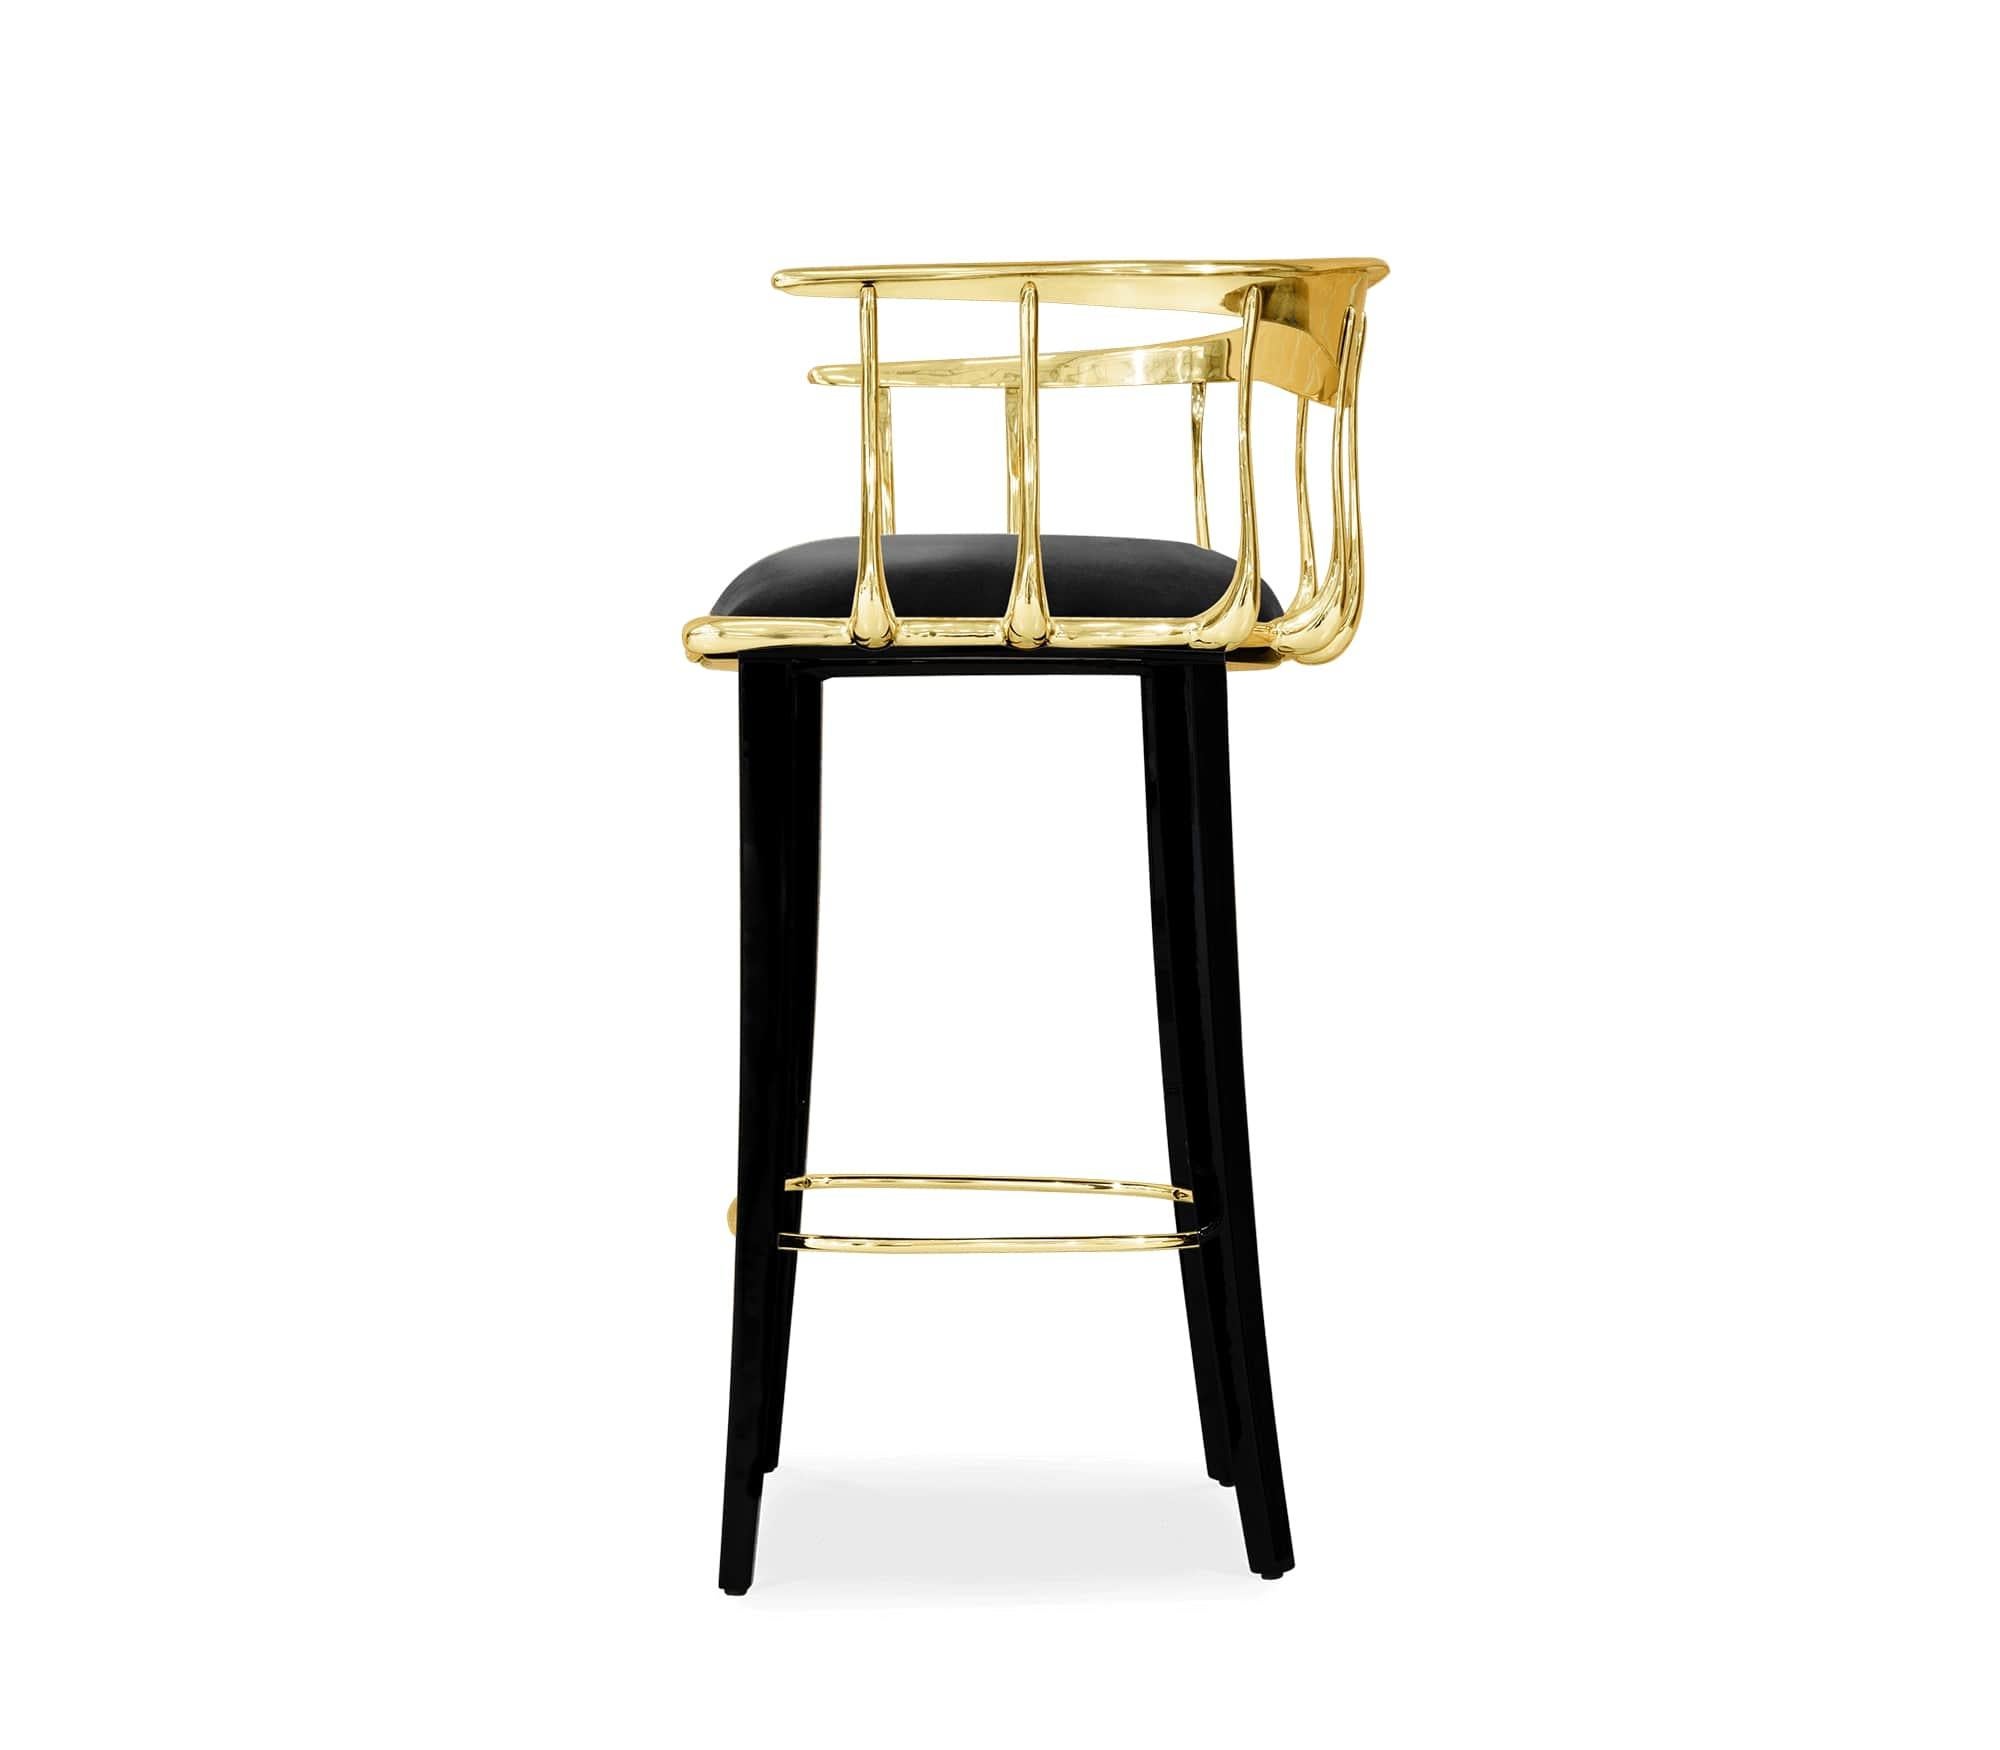 The Nº11 BAR STOOL takes the cue from key figures of the surrealist movement such as Salvador Dali and René Magritte and turns their work into a subtle art furniture piece.
This elegant bar chair features a large bow back rail that’s held by